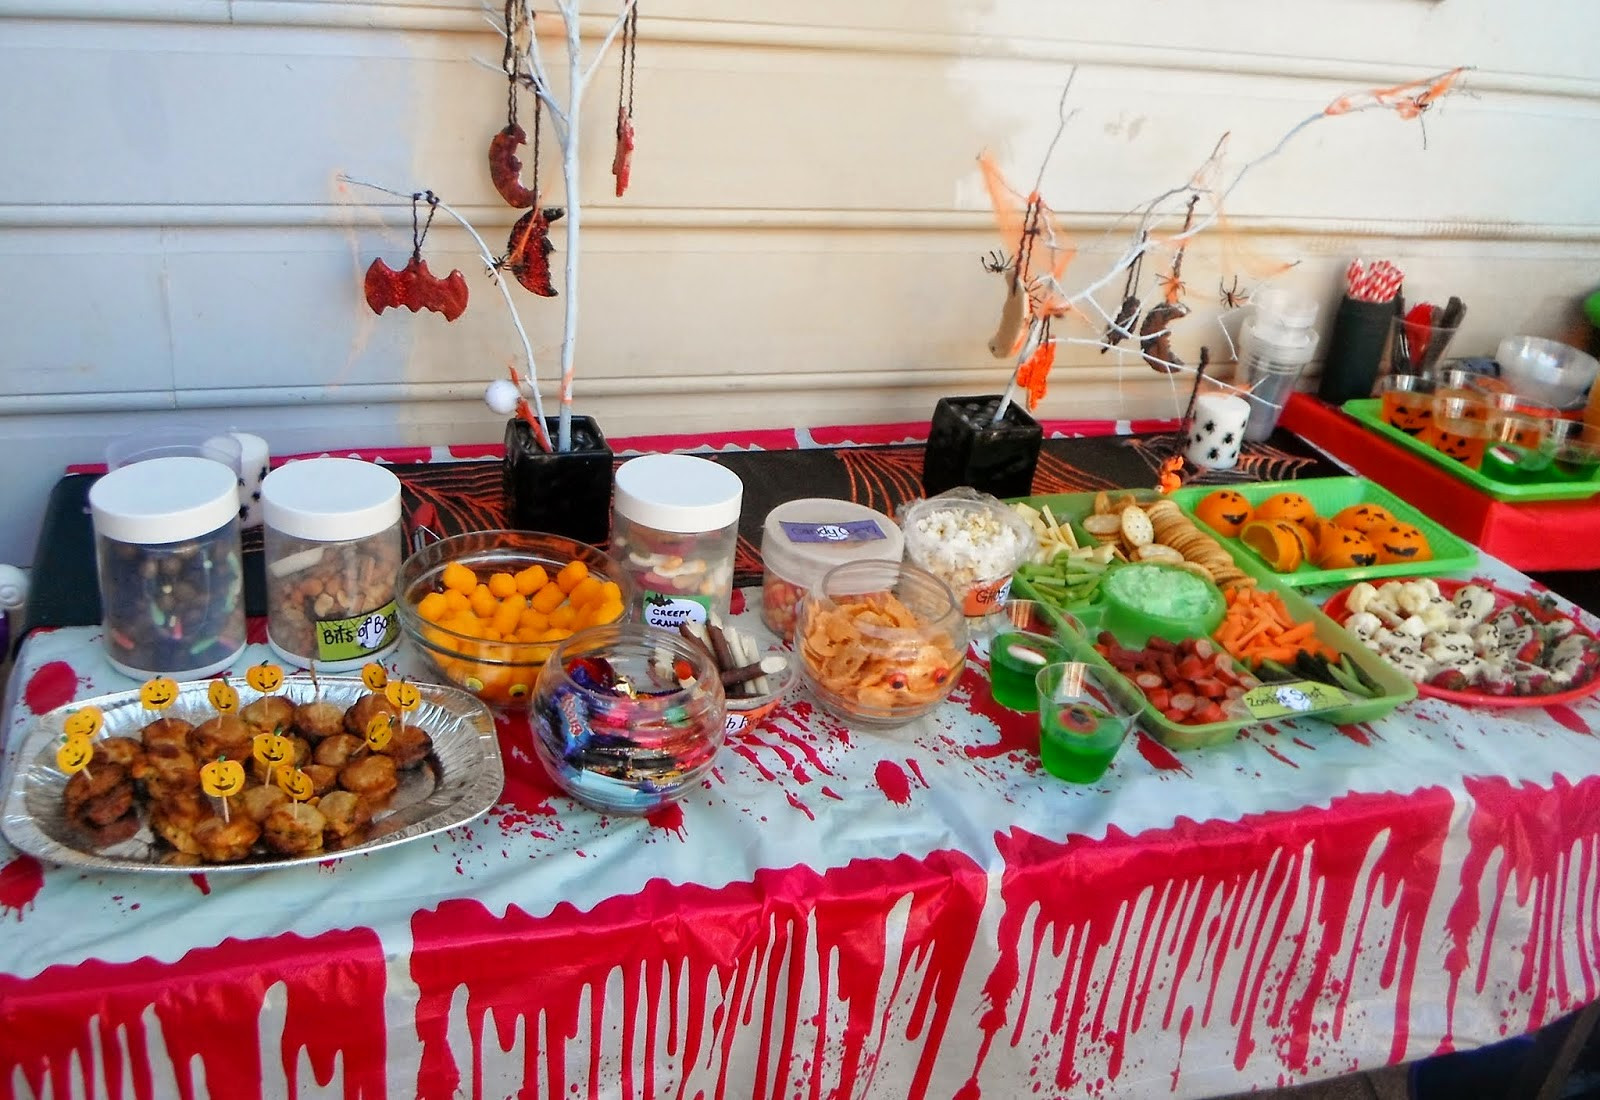 Birthday Party Food Ideas For Kids
 TASTY CATERING Birthday Party Food Ideas